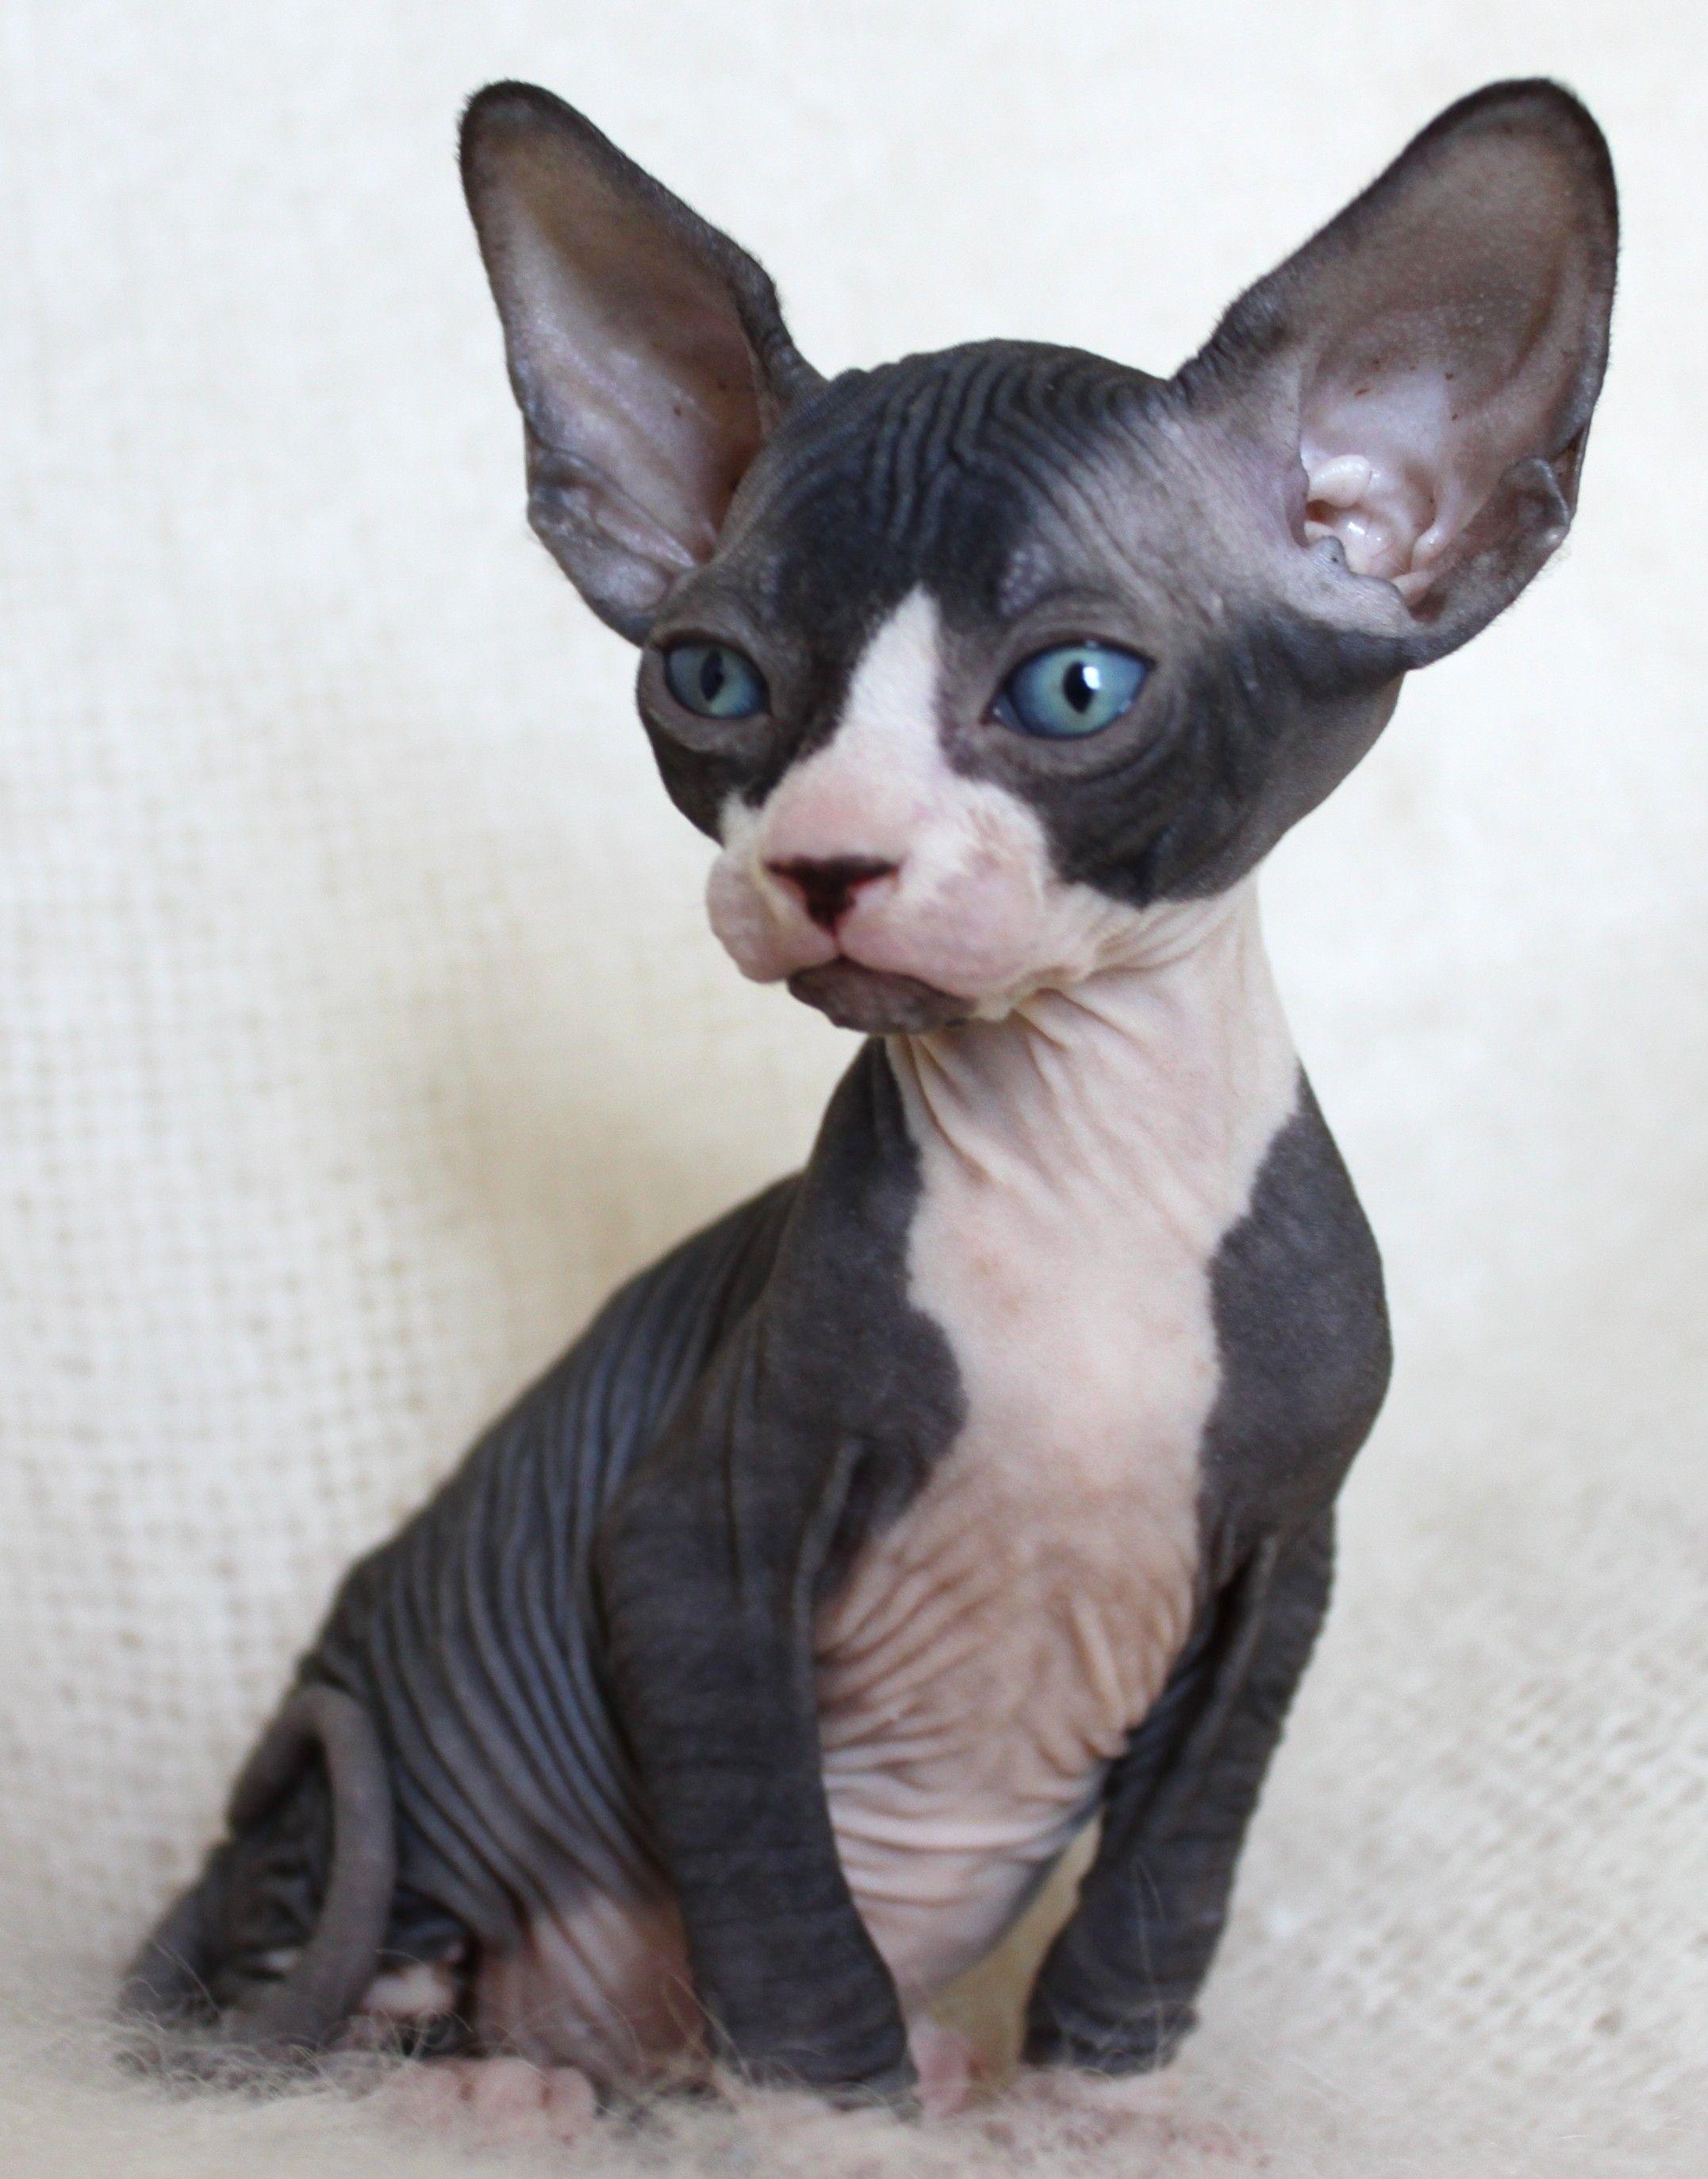 Black Hairless Cats Picture Gallery.com. Cats